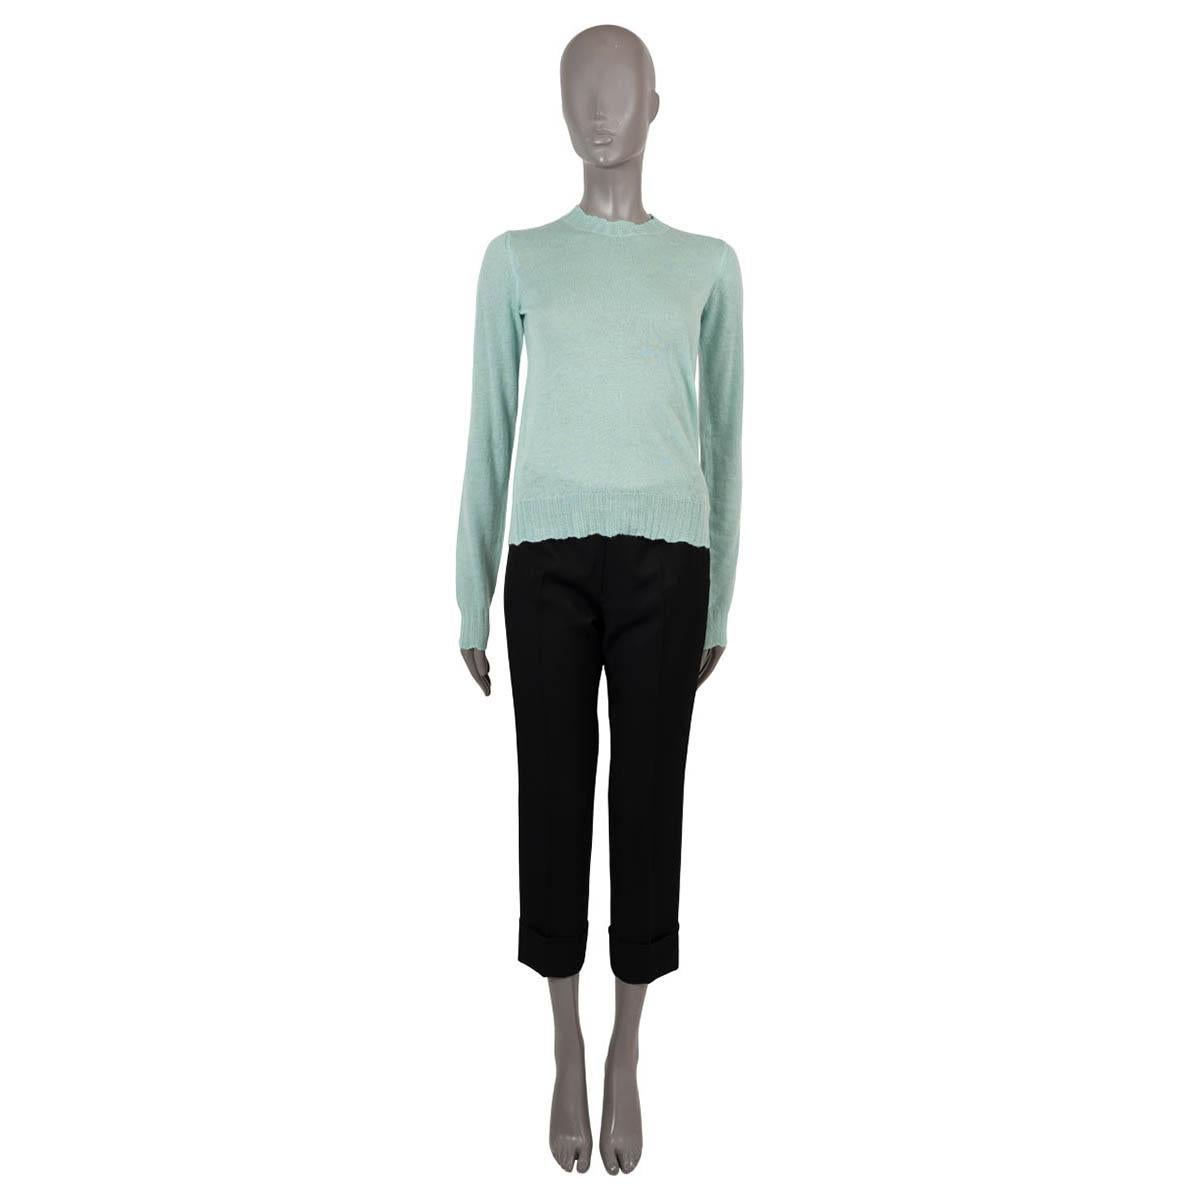 100% authentic Bottega Veneta fine-knit sweater in aqua cashmere (100%). Features a crewneck with rib-knit cuffs and hem. Has been worn and is in excellent condition.

2020 Pre-Spring

Measurements
Model	604912 VKJY0 EPBV-19-2436
Tag